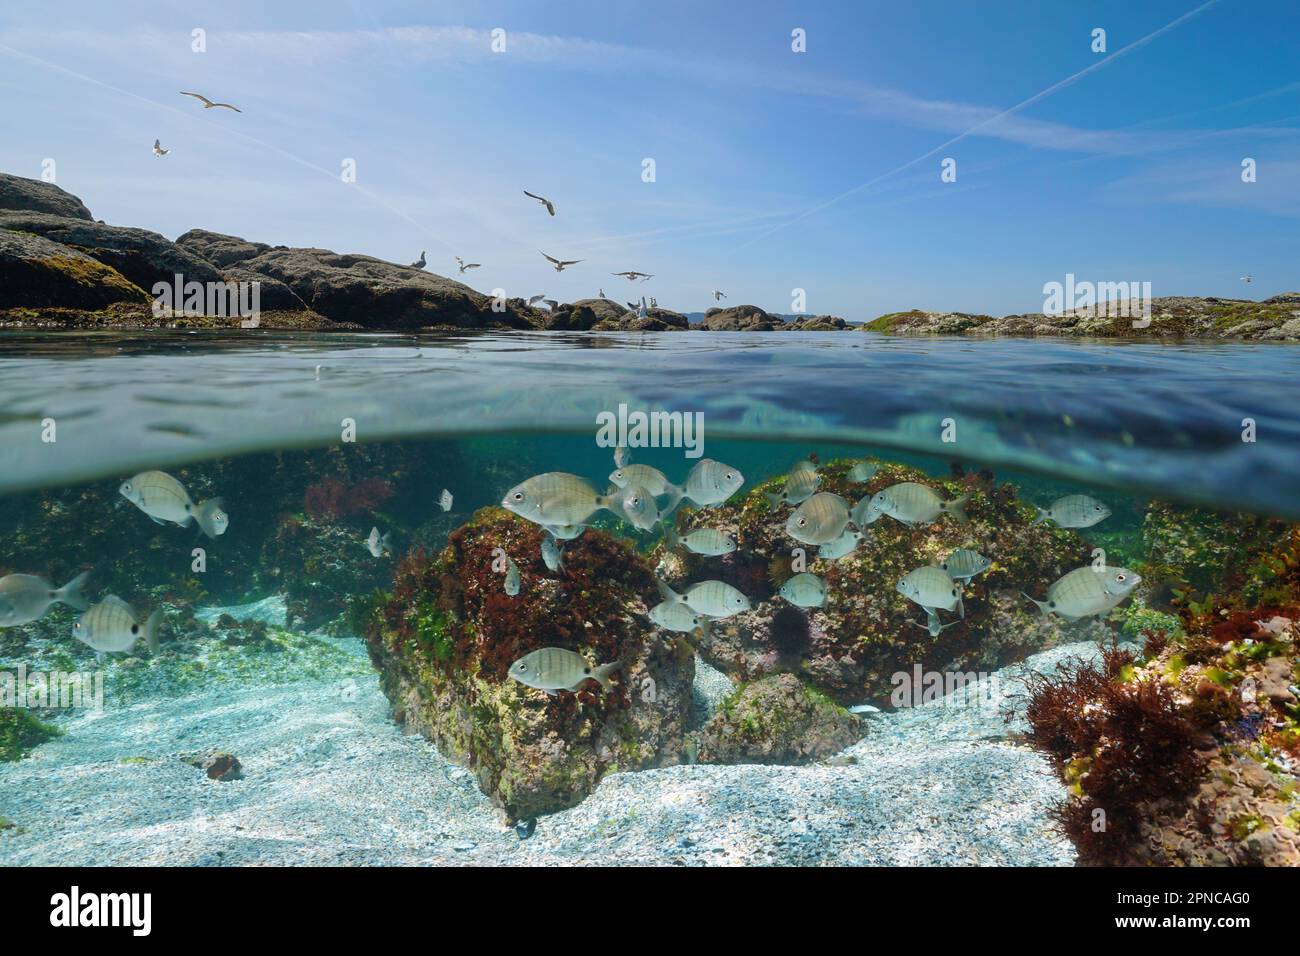 Atlantic ocean seascape, shoal of seabream fish underwater and rocky shore with gulls, split level view over and under water surface, Spain, Galicia Stock Photo